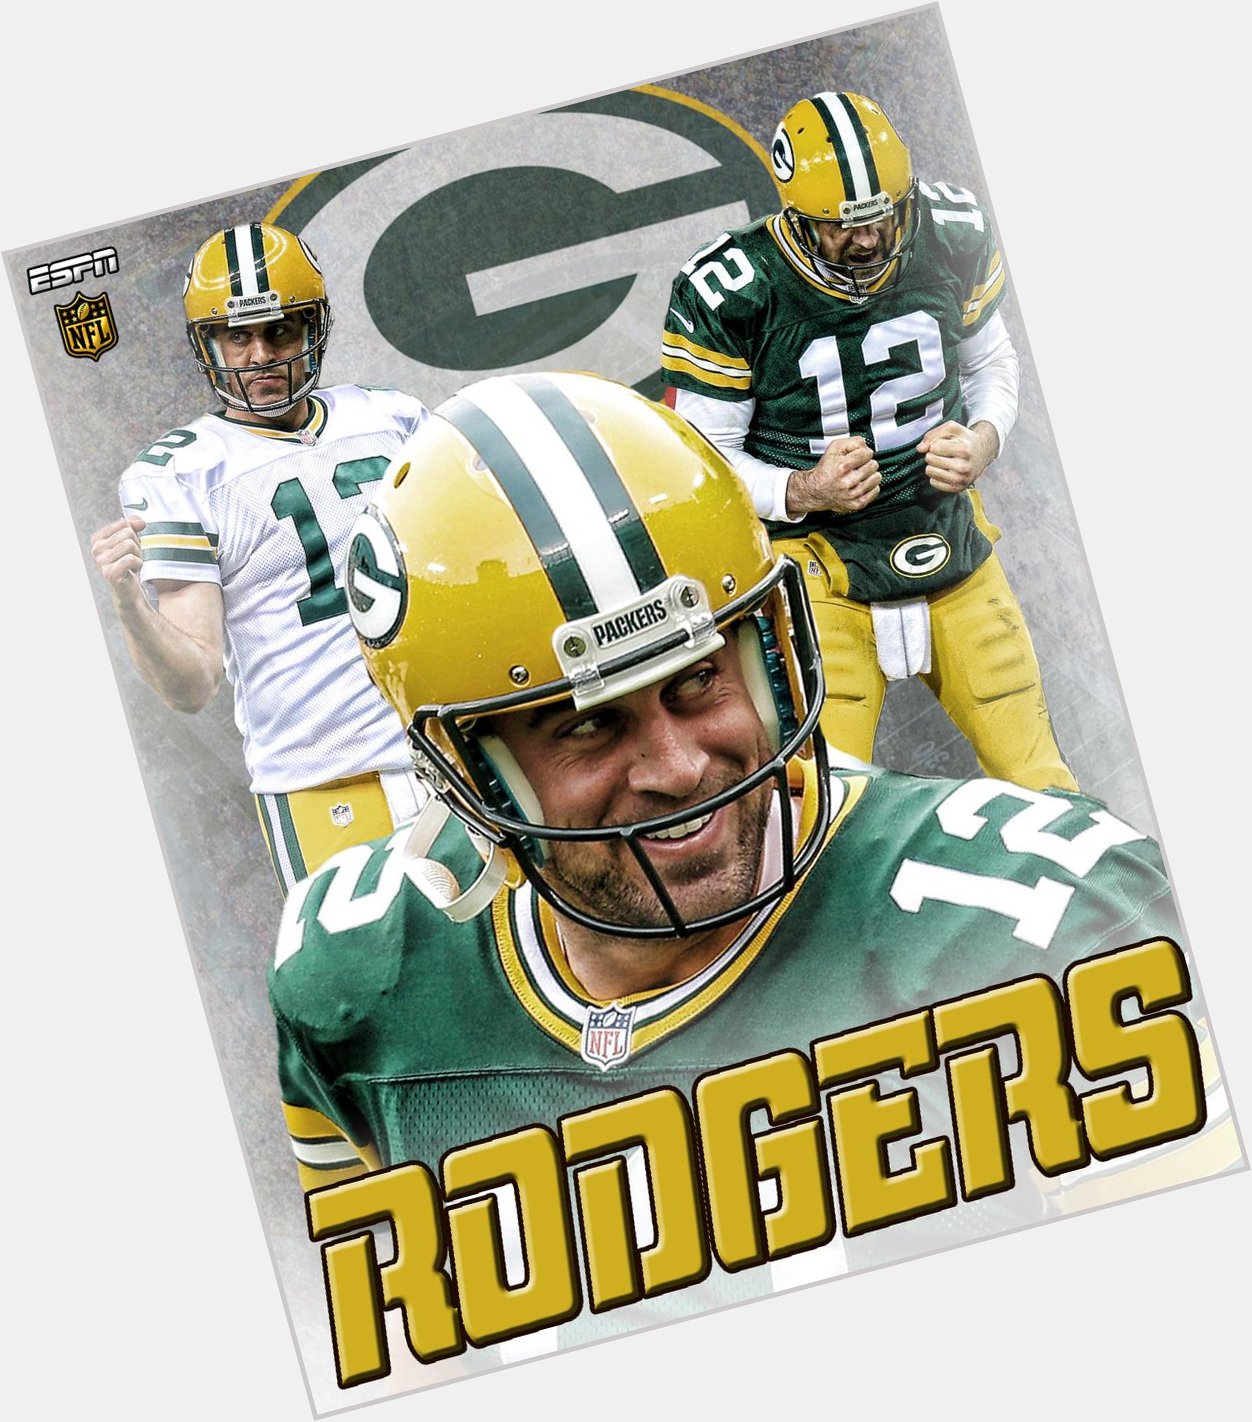   ESPNNFL: Happy 32nd birthday Aaron Rodgers.
His career TD-Int ratio of 4.1 is the best EVER. Nex 